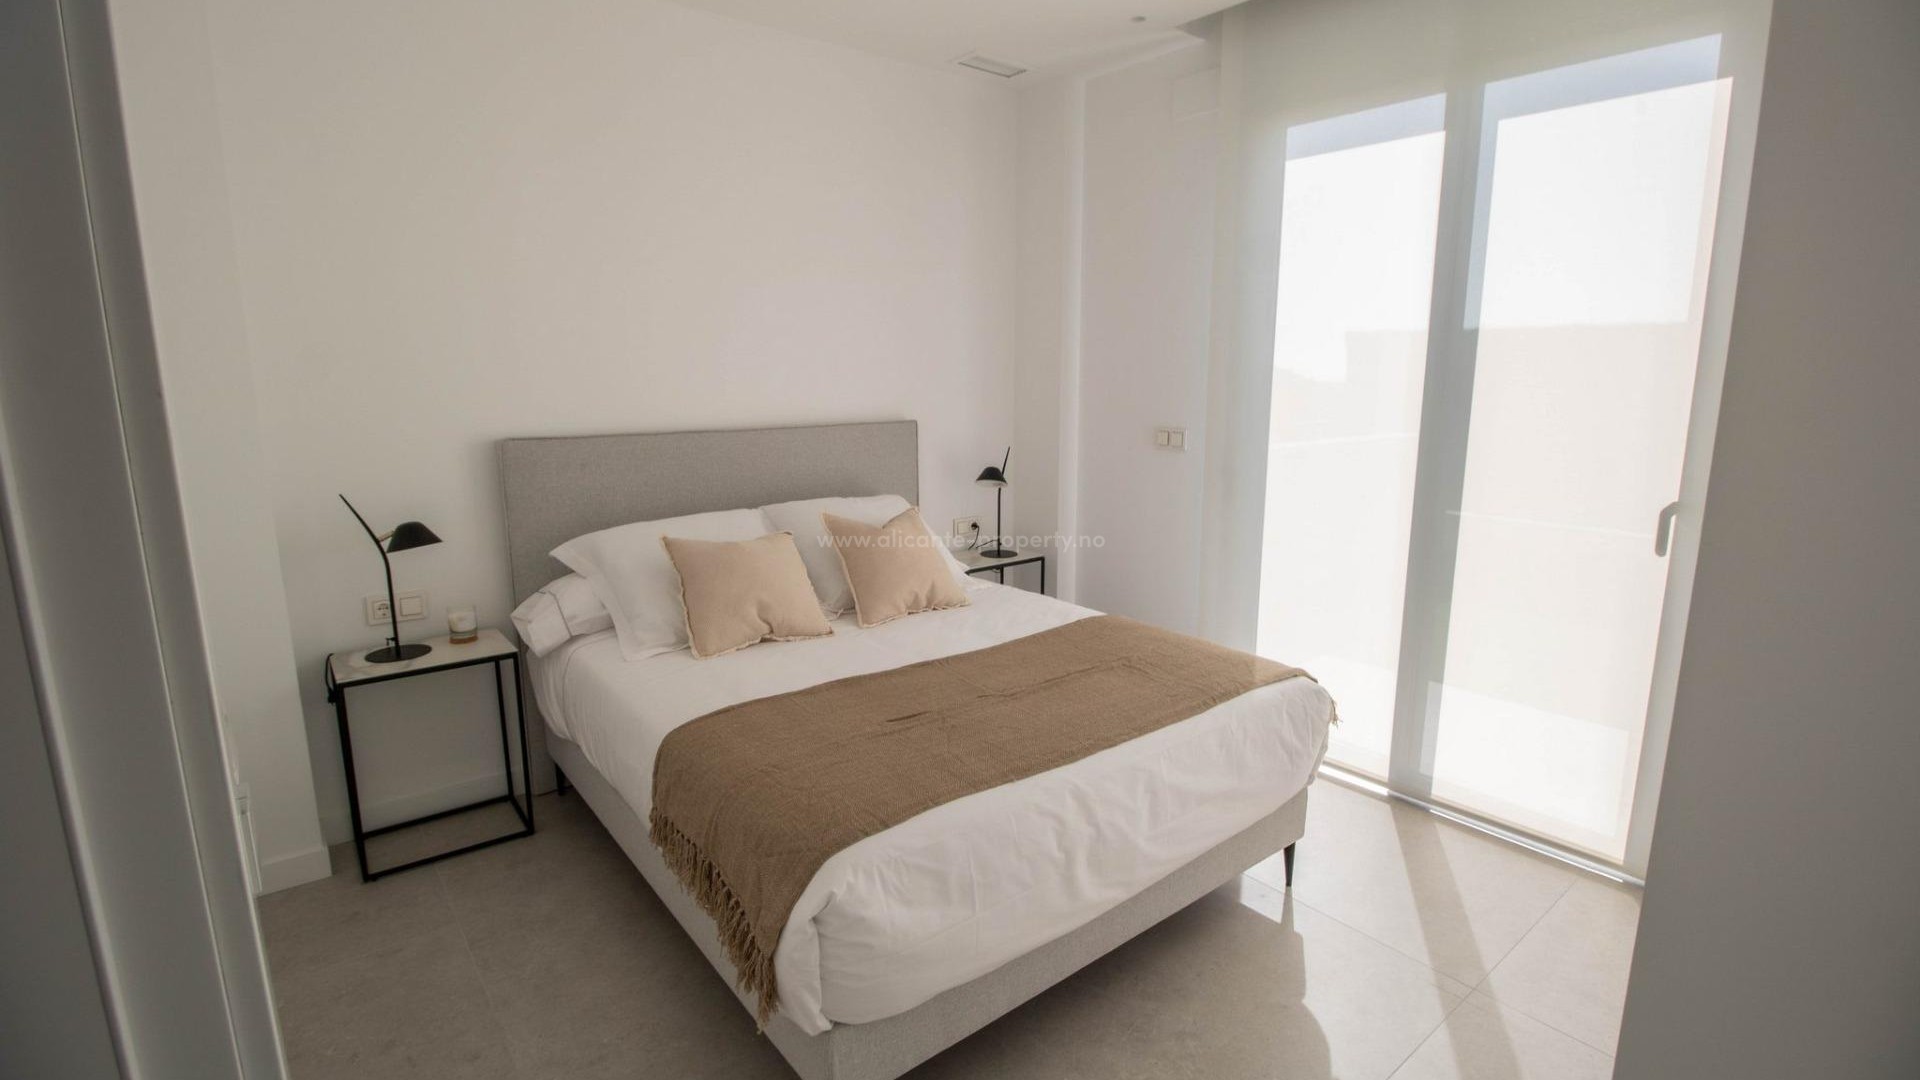 22 villas/houses in Finestrat by Puig Campana Golf (1 min.), 3 bedrooms, 3 bathrooms, terrace, solarium, private garden with swimming pool and parking space.